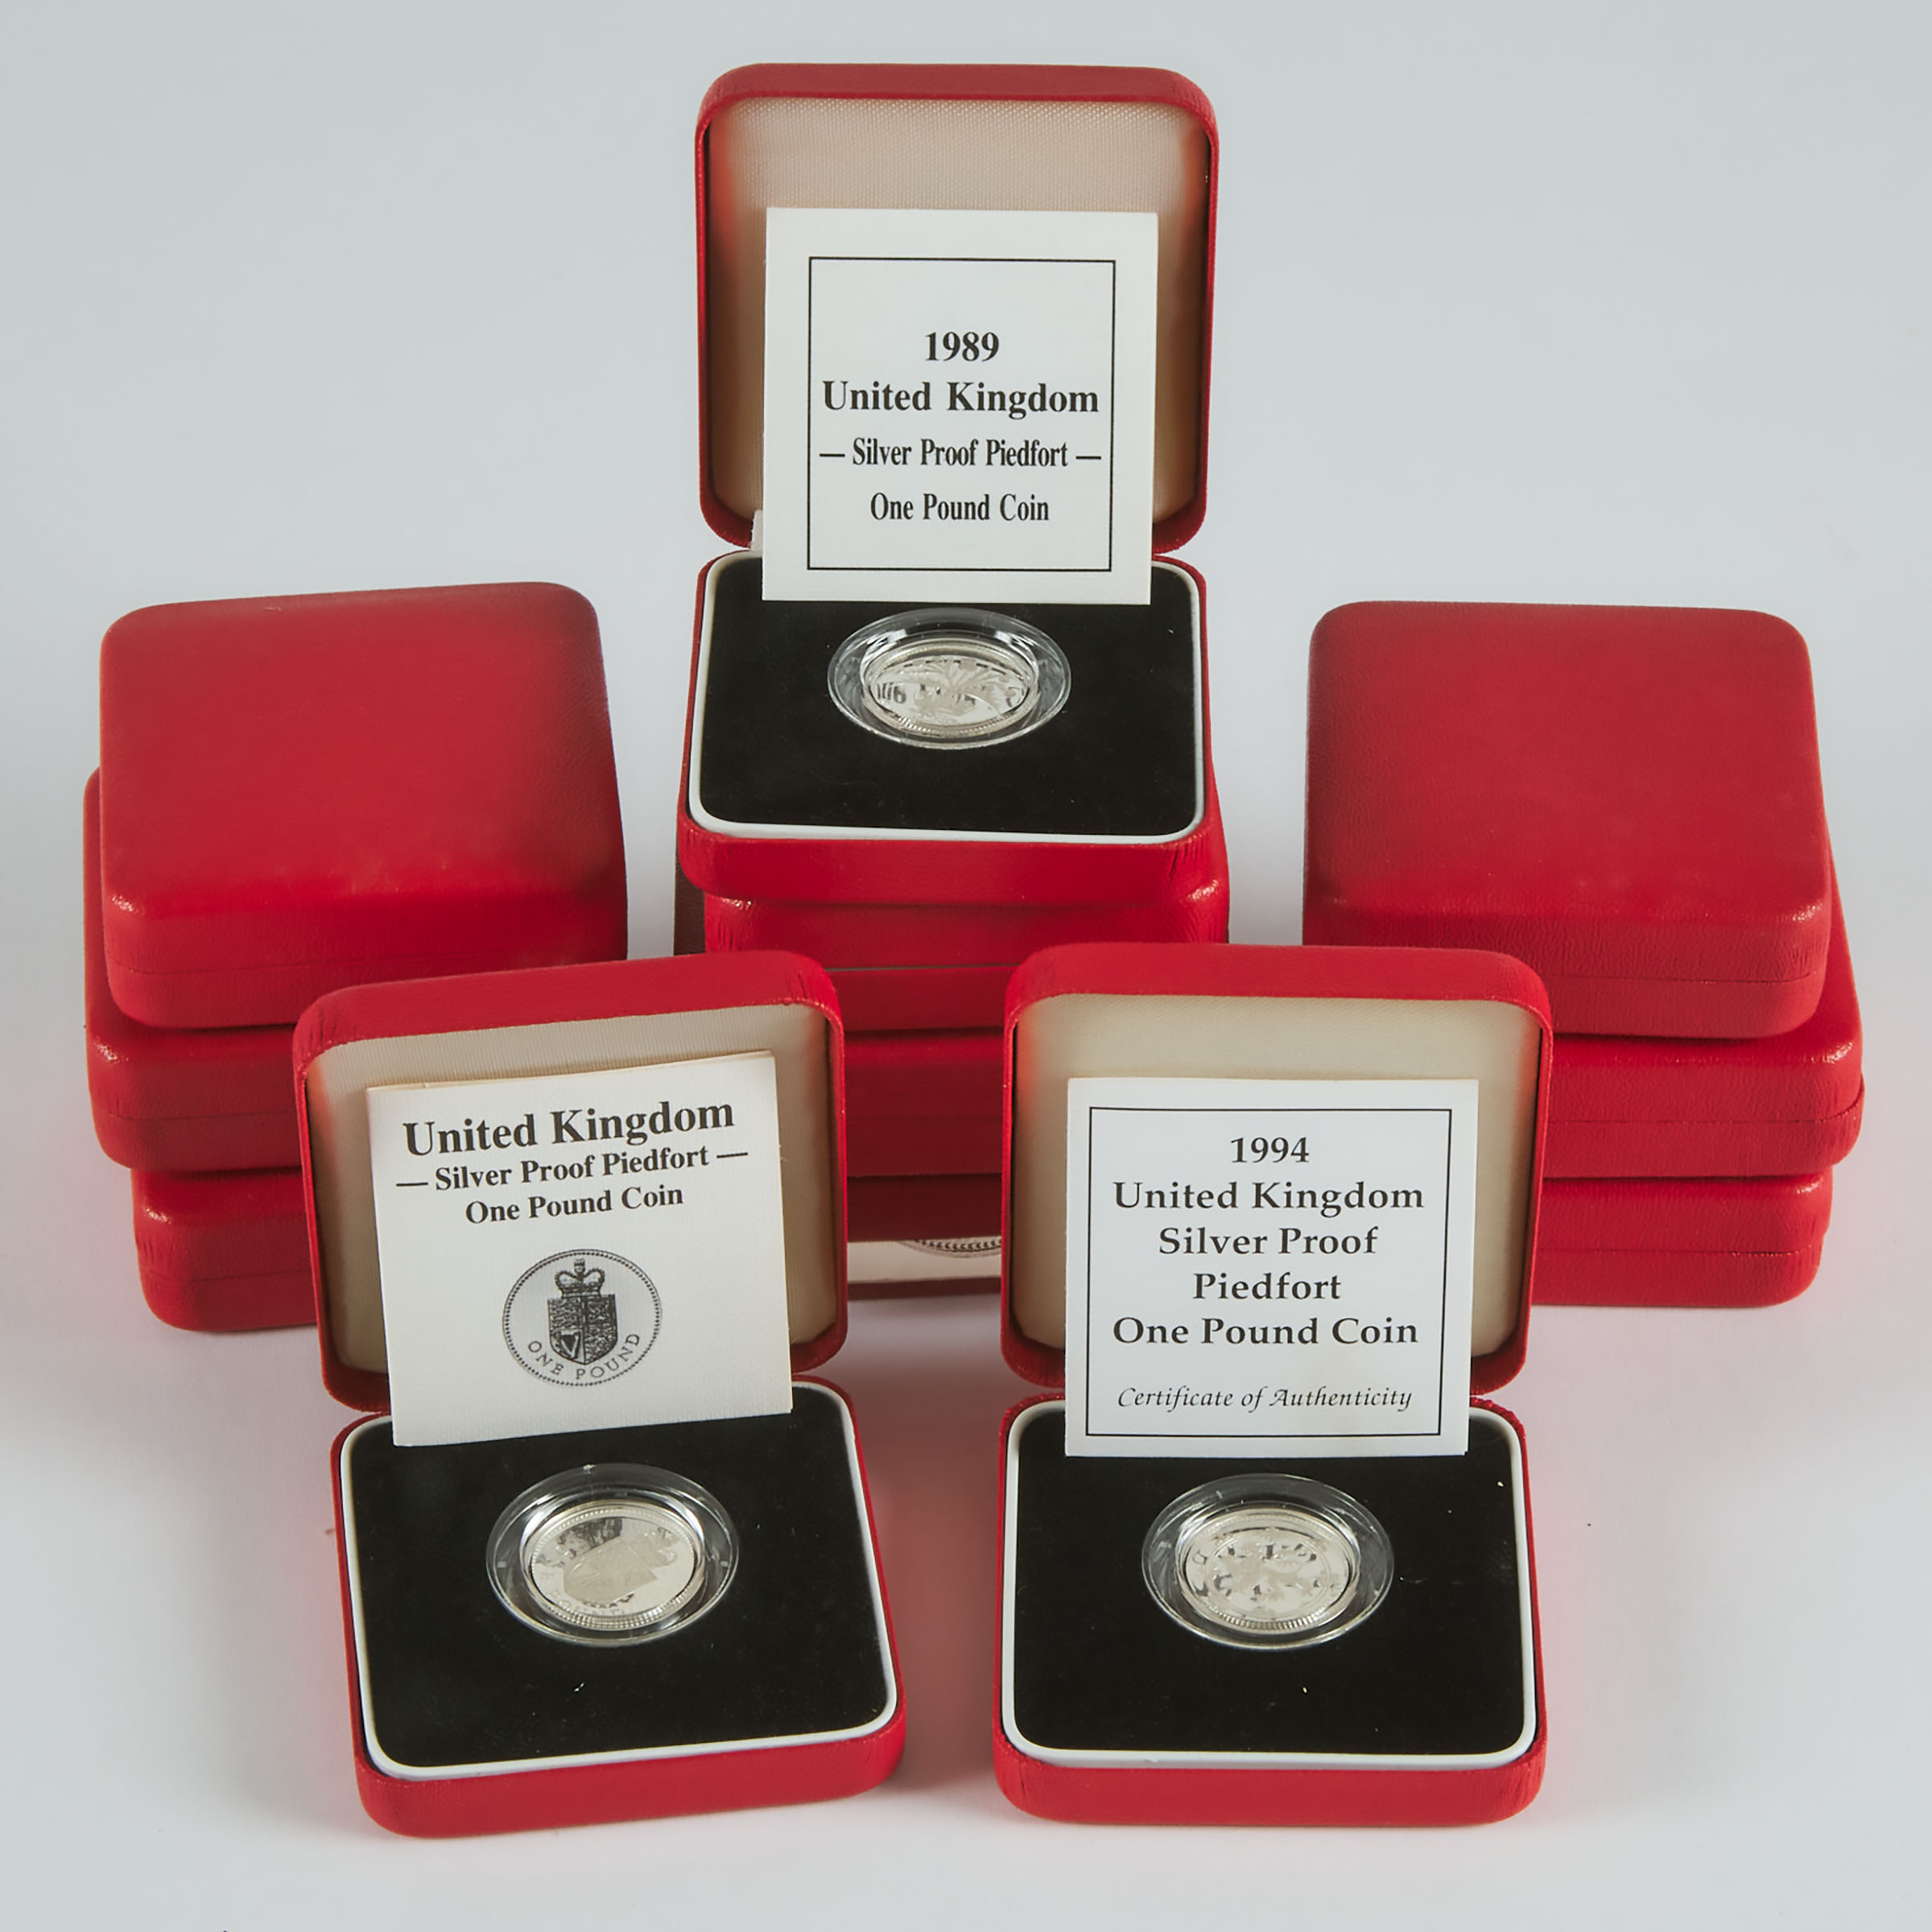 12 British Sterling Silver Proof One Pound Coins